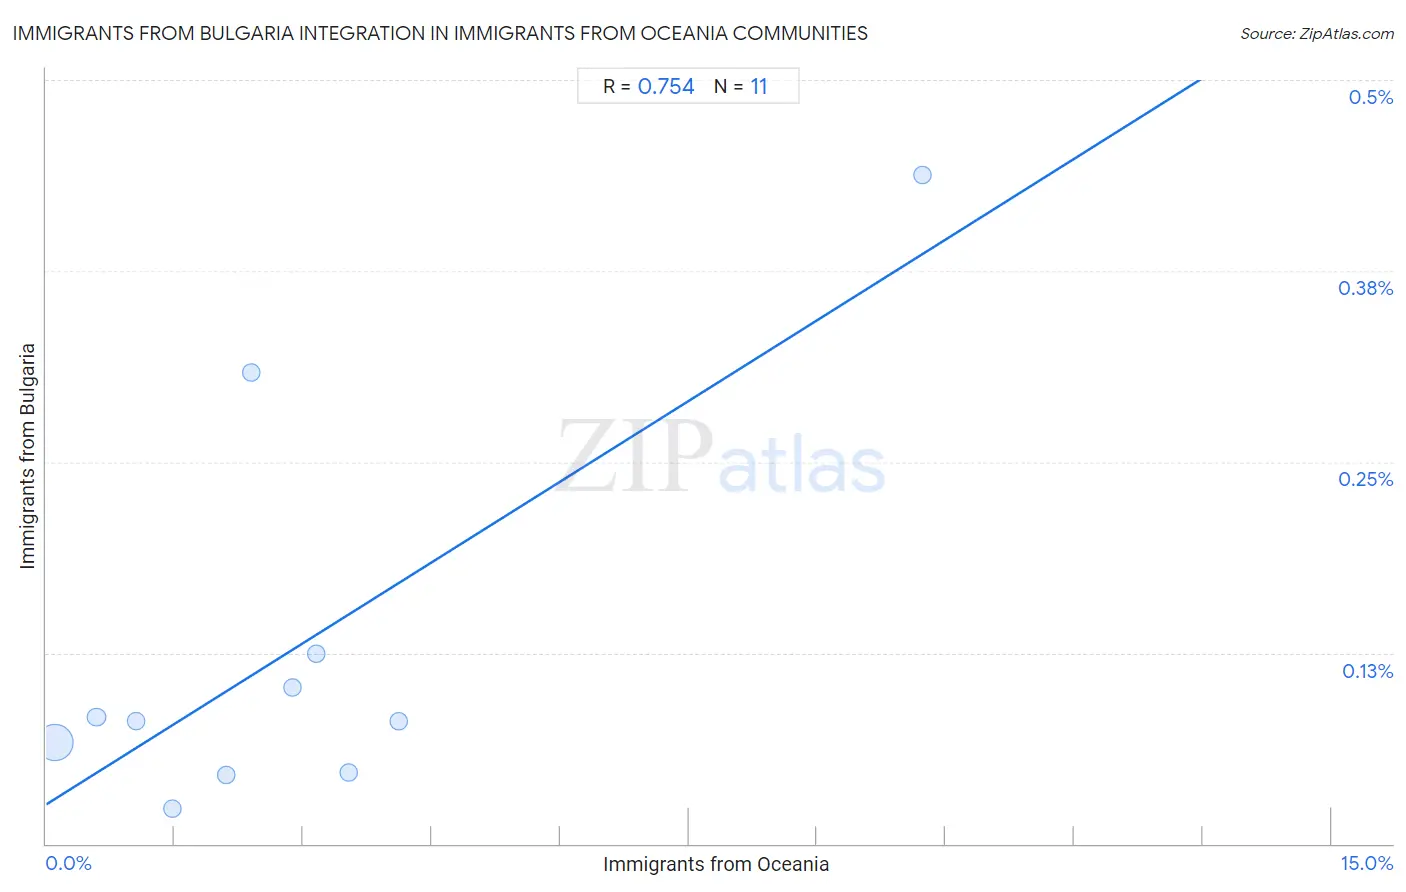 Immigrants from Oceania Integration in Immigrants from Bulgaria Communities